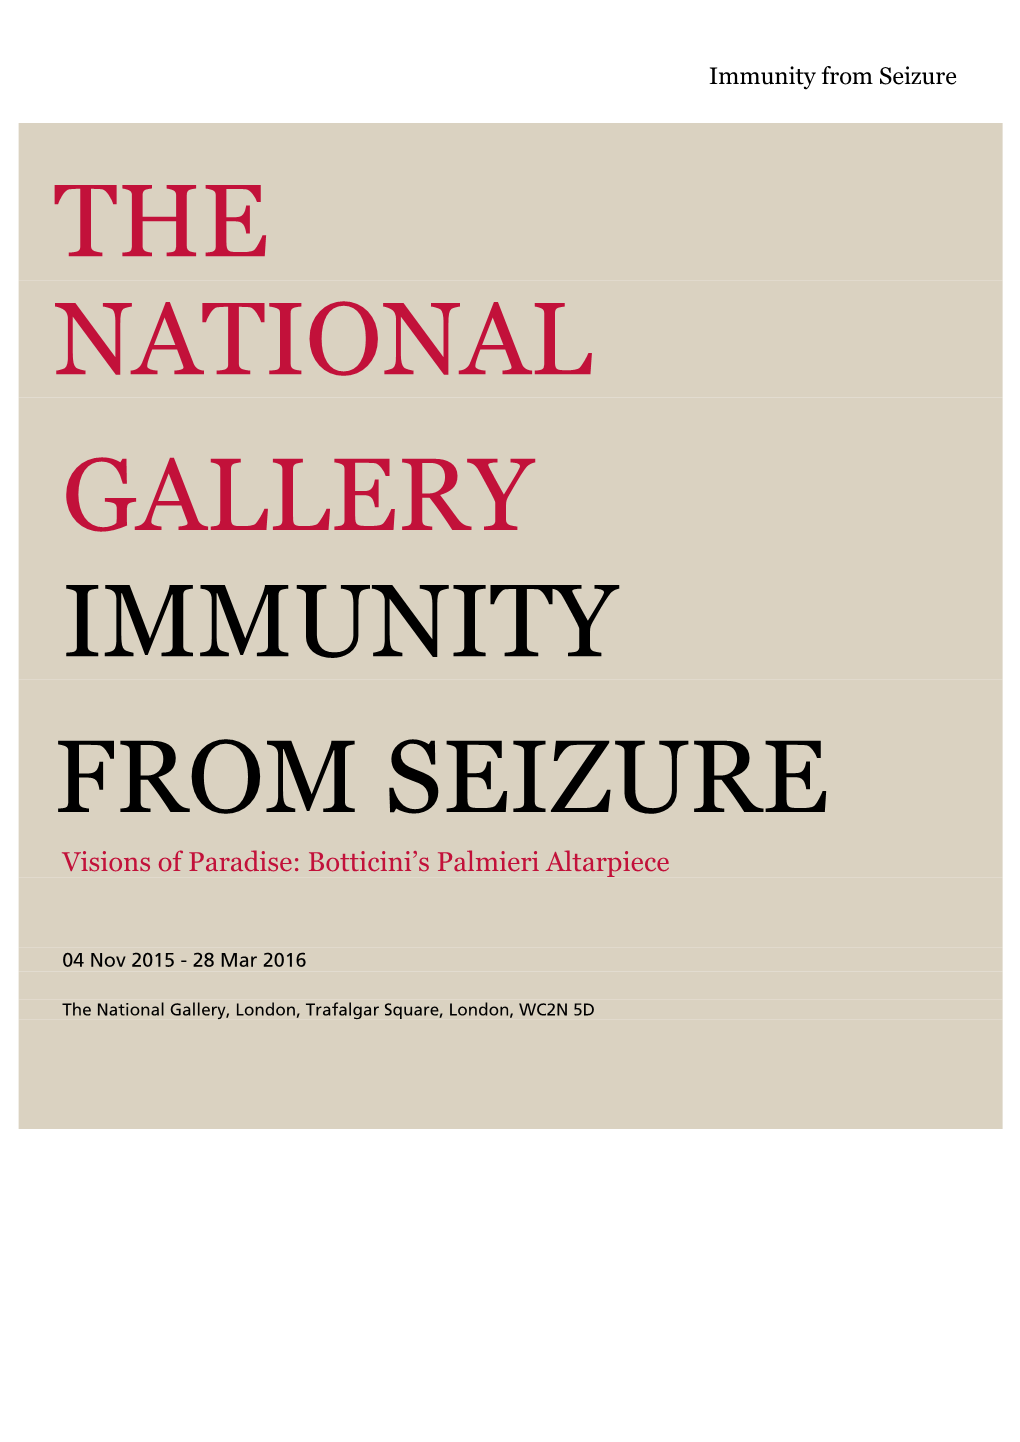 The National Gallery Immunity from Seizure